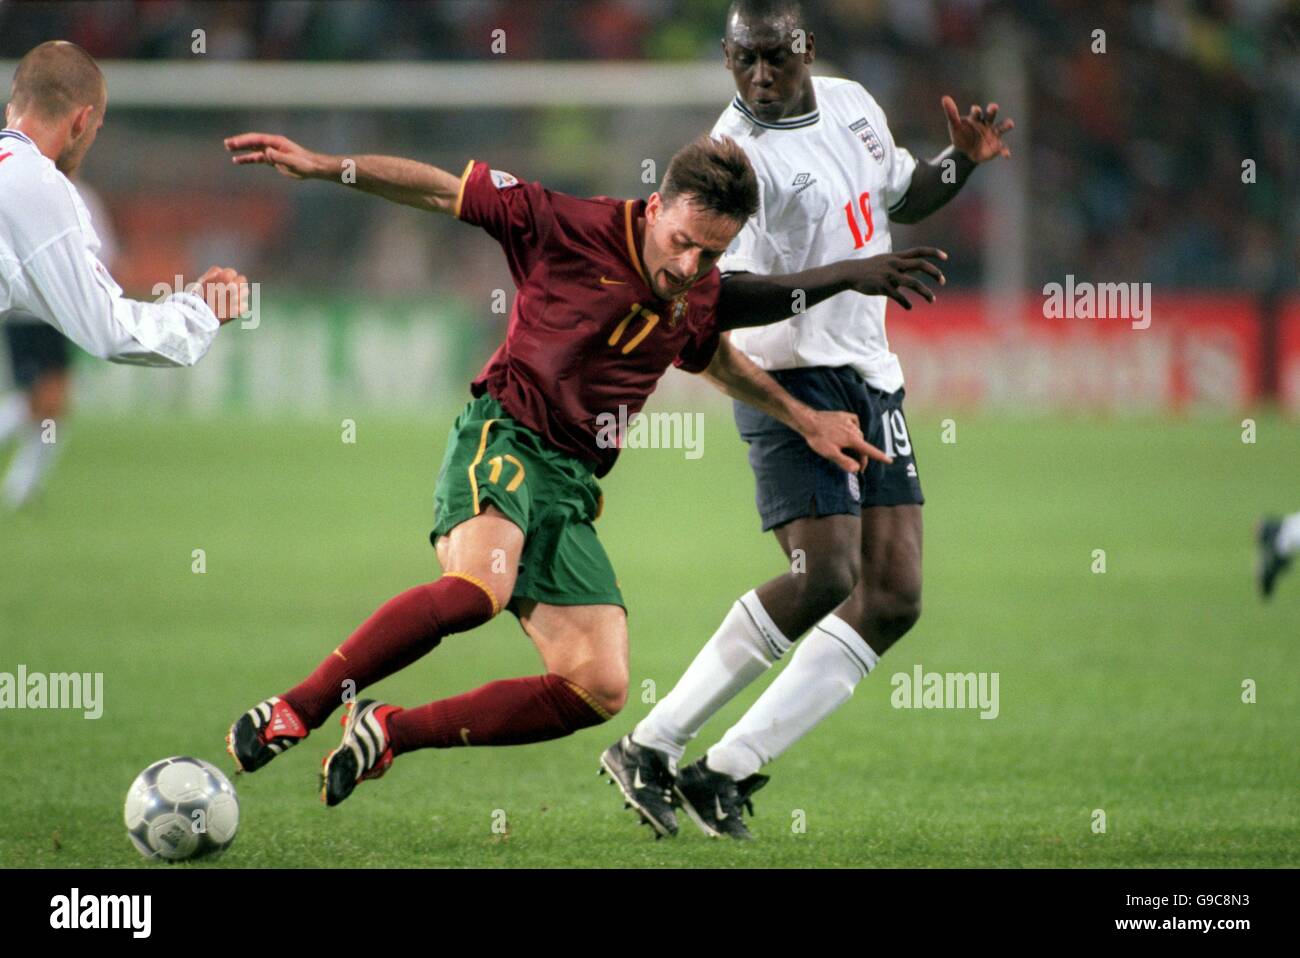 Portugal's Paulo Bento (l) goes down under pressure from England's Emile Heskey (r) Stock Photo